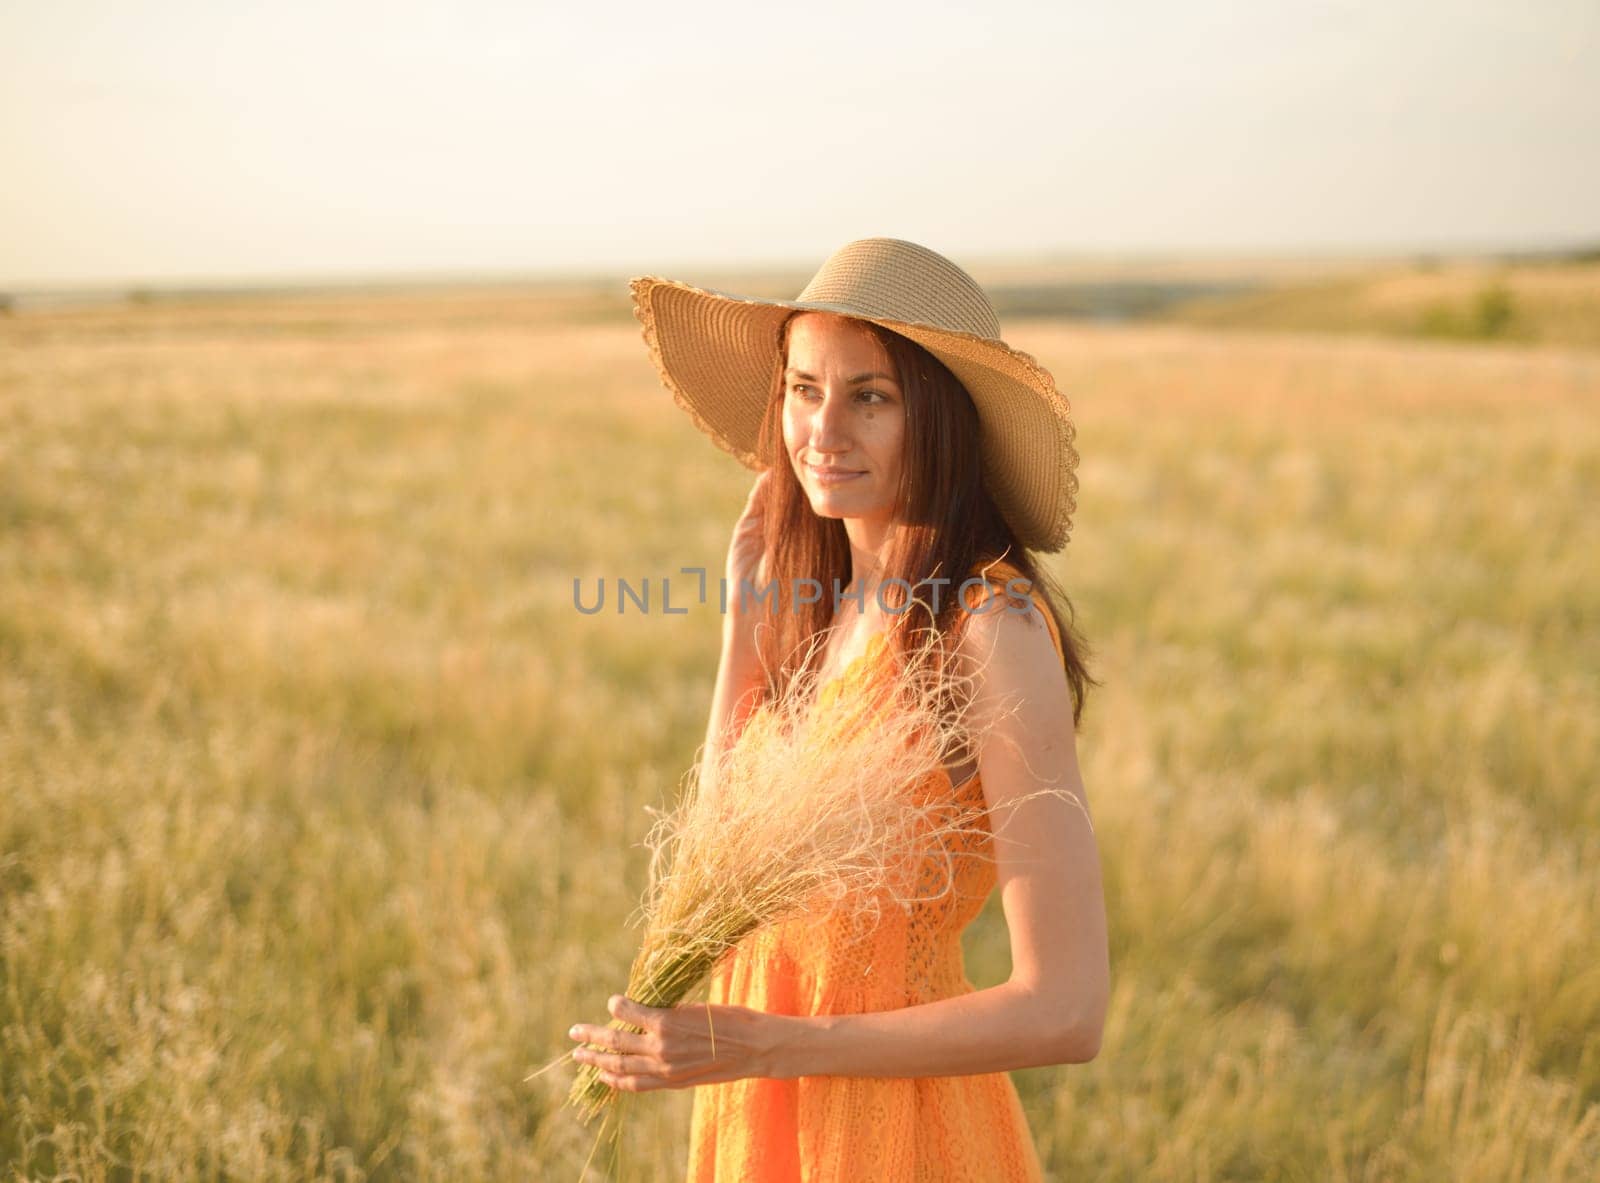 Young woman in an orange dress and a straw hat standing on a field in the rays of the setting sun by Ekaterina34